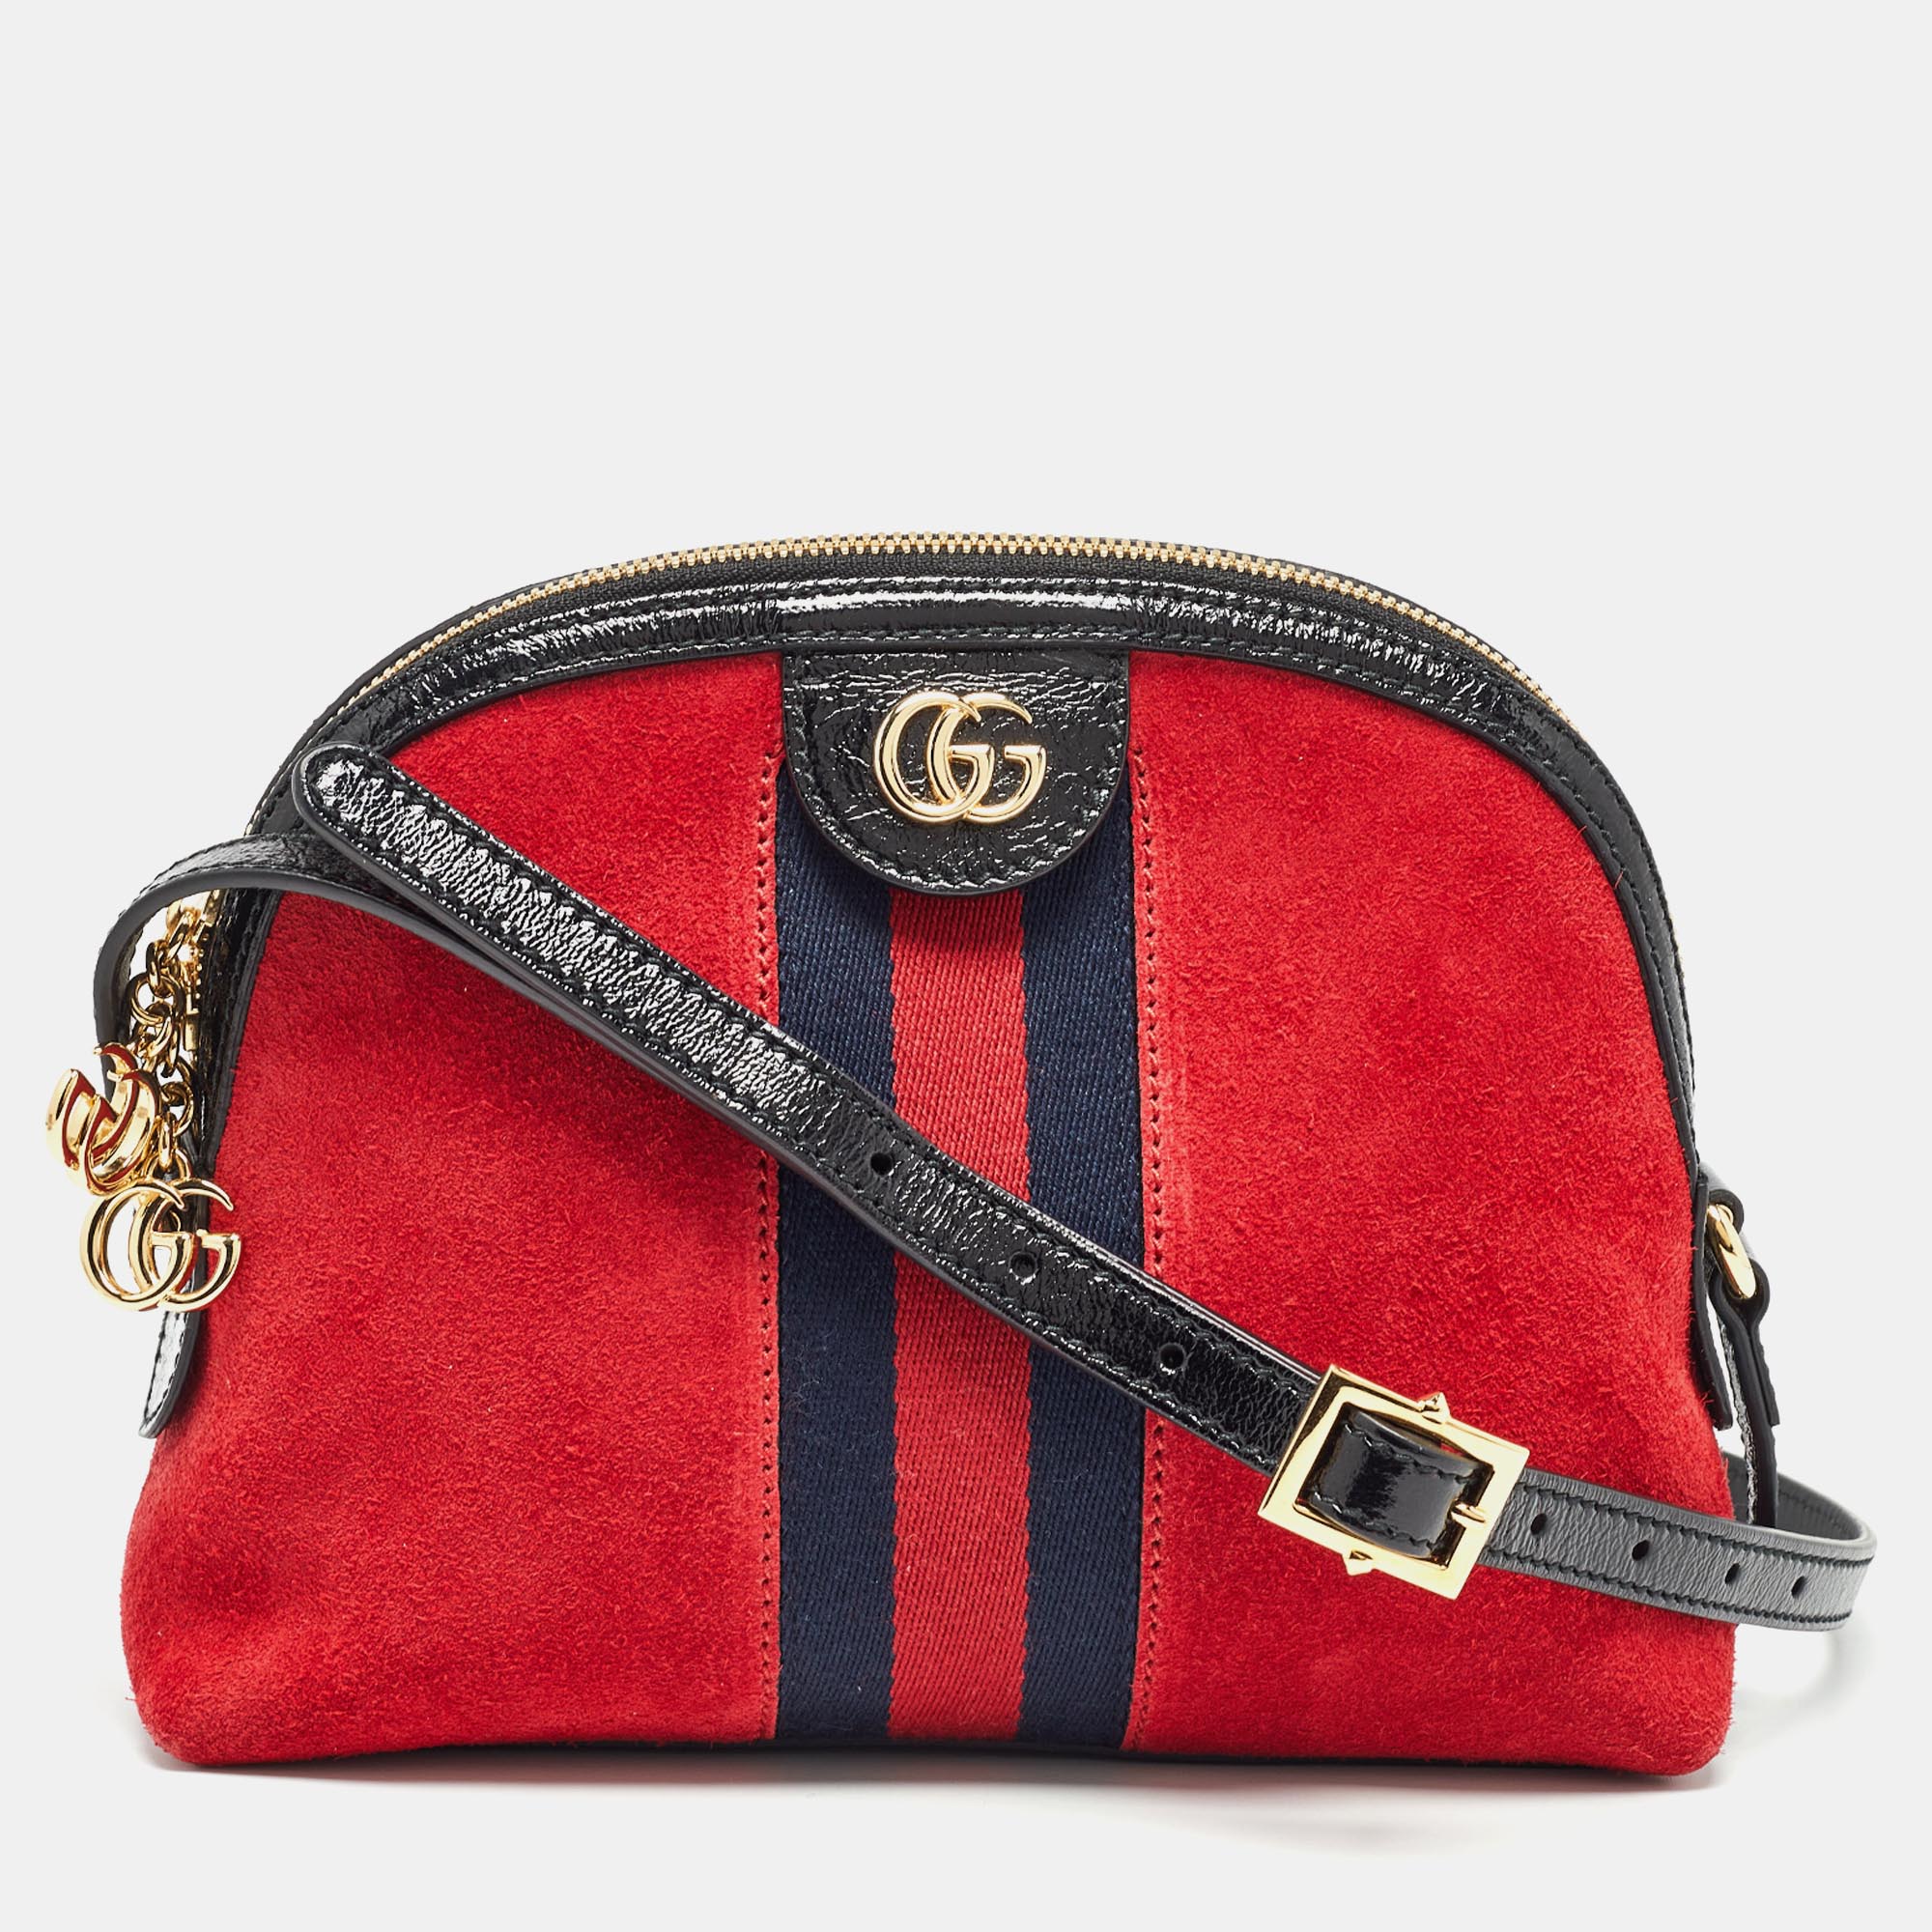 

Gucci Red/Black Suede and Patent Leather Small Ophidia Shoulder Bag